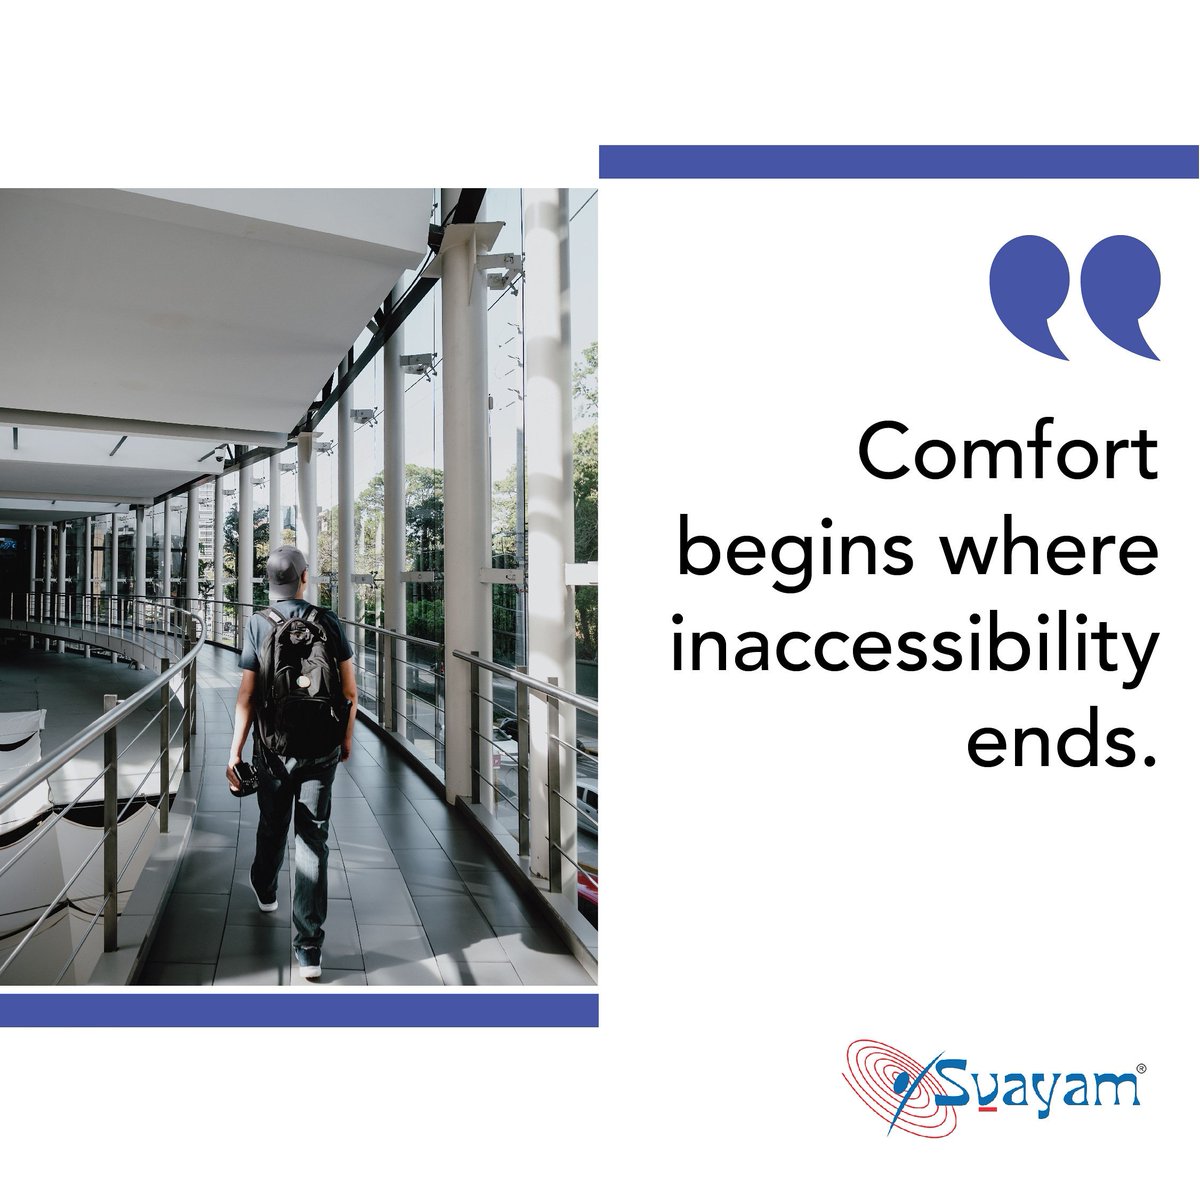 When everyone has equal access to the facilities that make a hotel comfortable for all, it is then that tourism becomes accessible for all.

 #YahanSeWahanTak
#Accessiblity4All #AccessibleTourism #AccessibleHotels #AccessibleInfrastructure #Accessibility #AccessibleMonuments